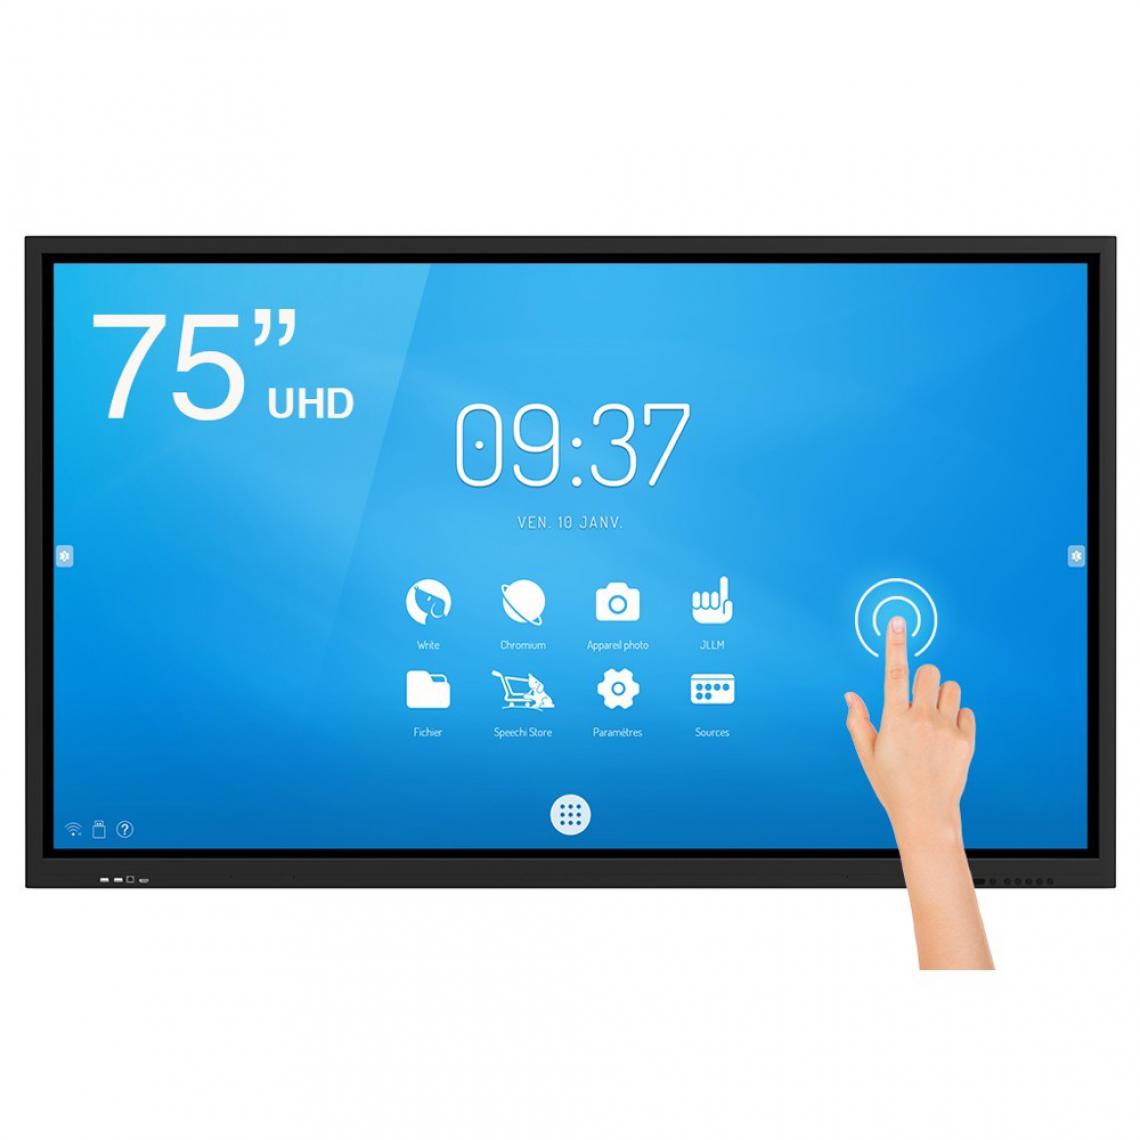 Speechi - Ecran interactif tactile Android SpeechiTouch UHD - 75" - Tablette Android